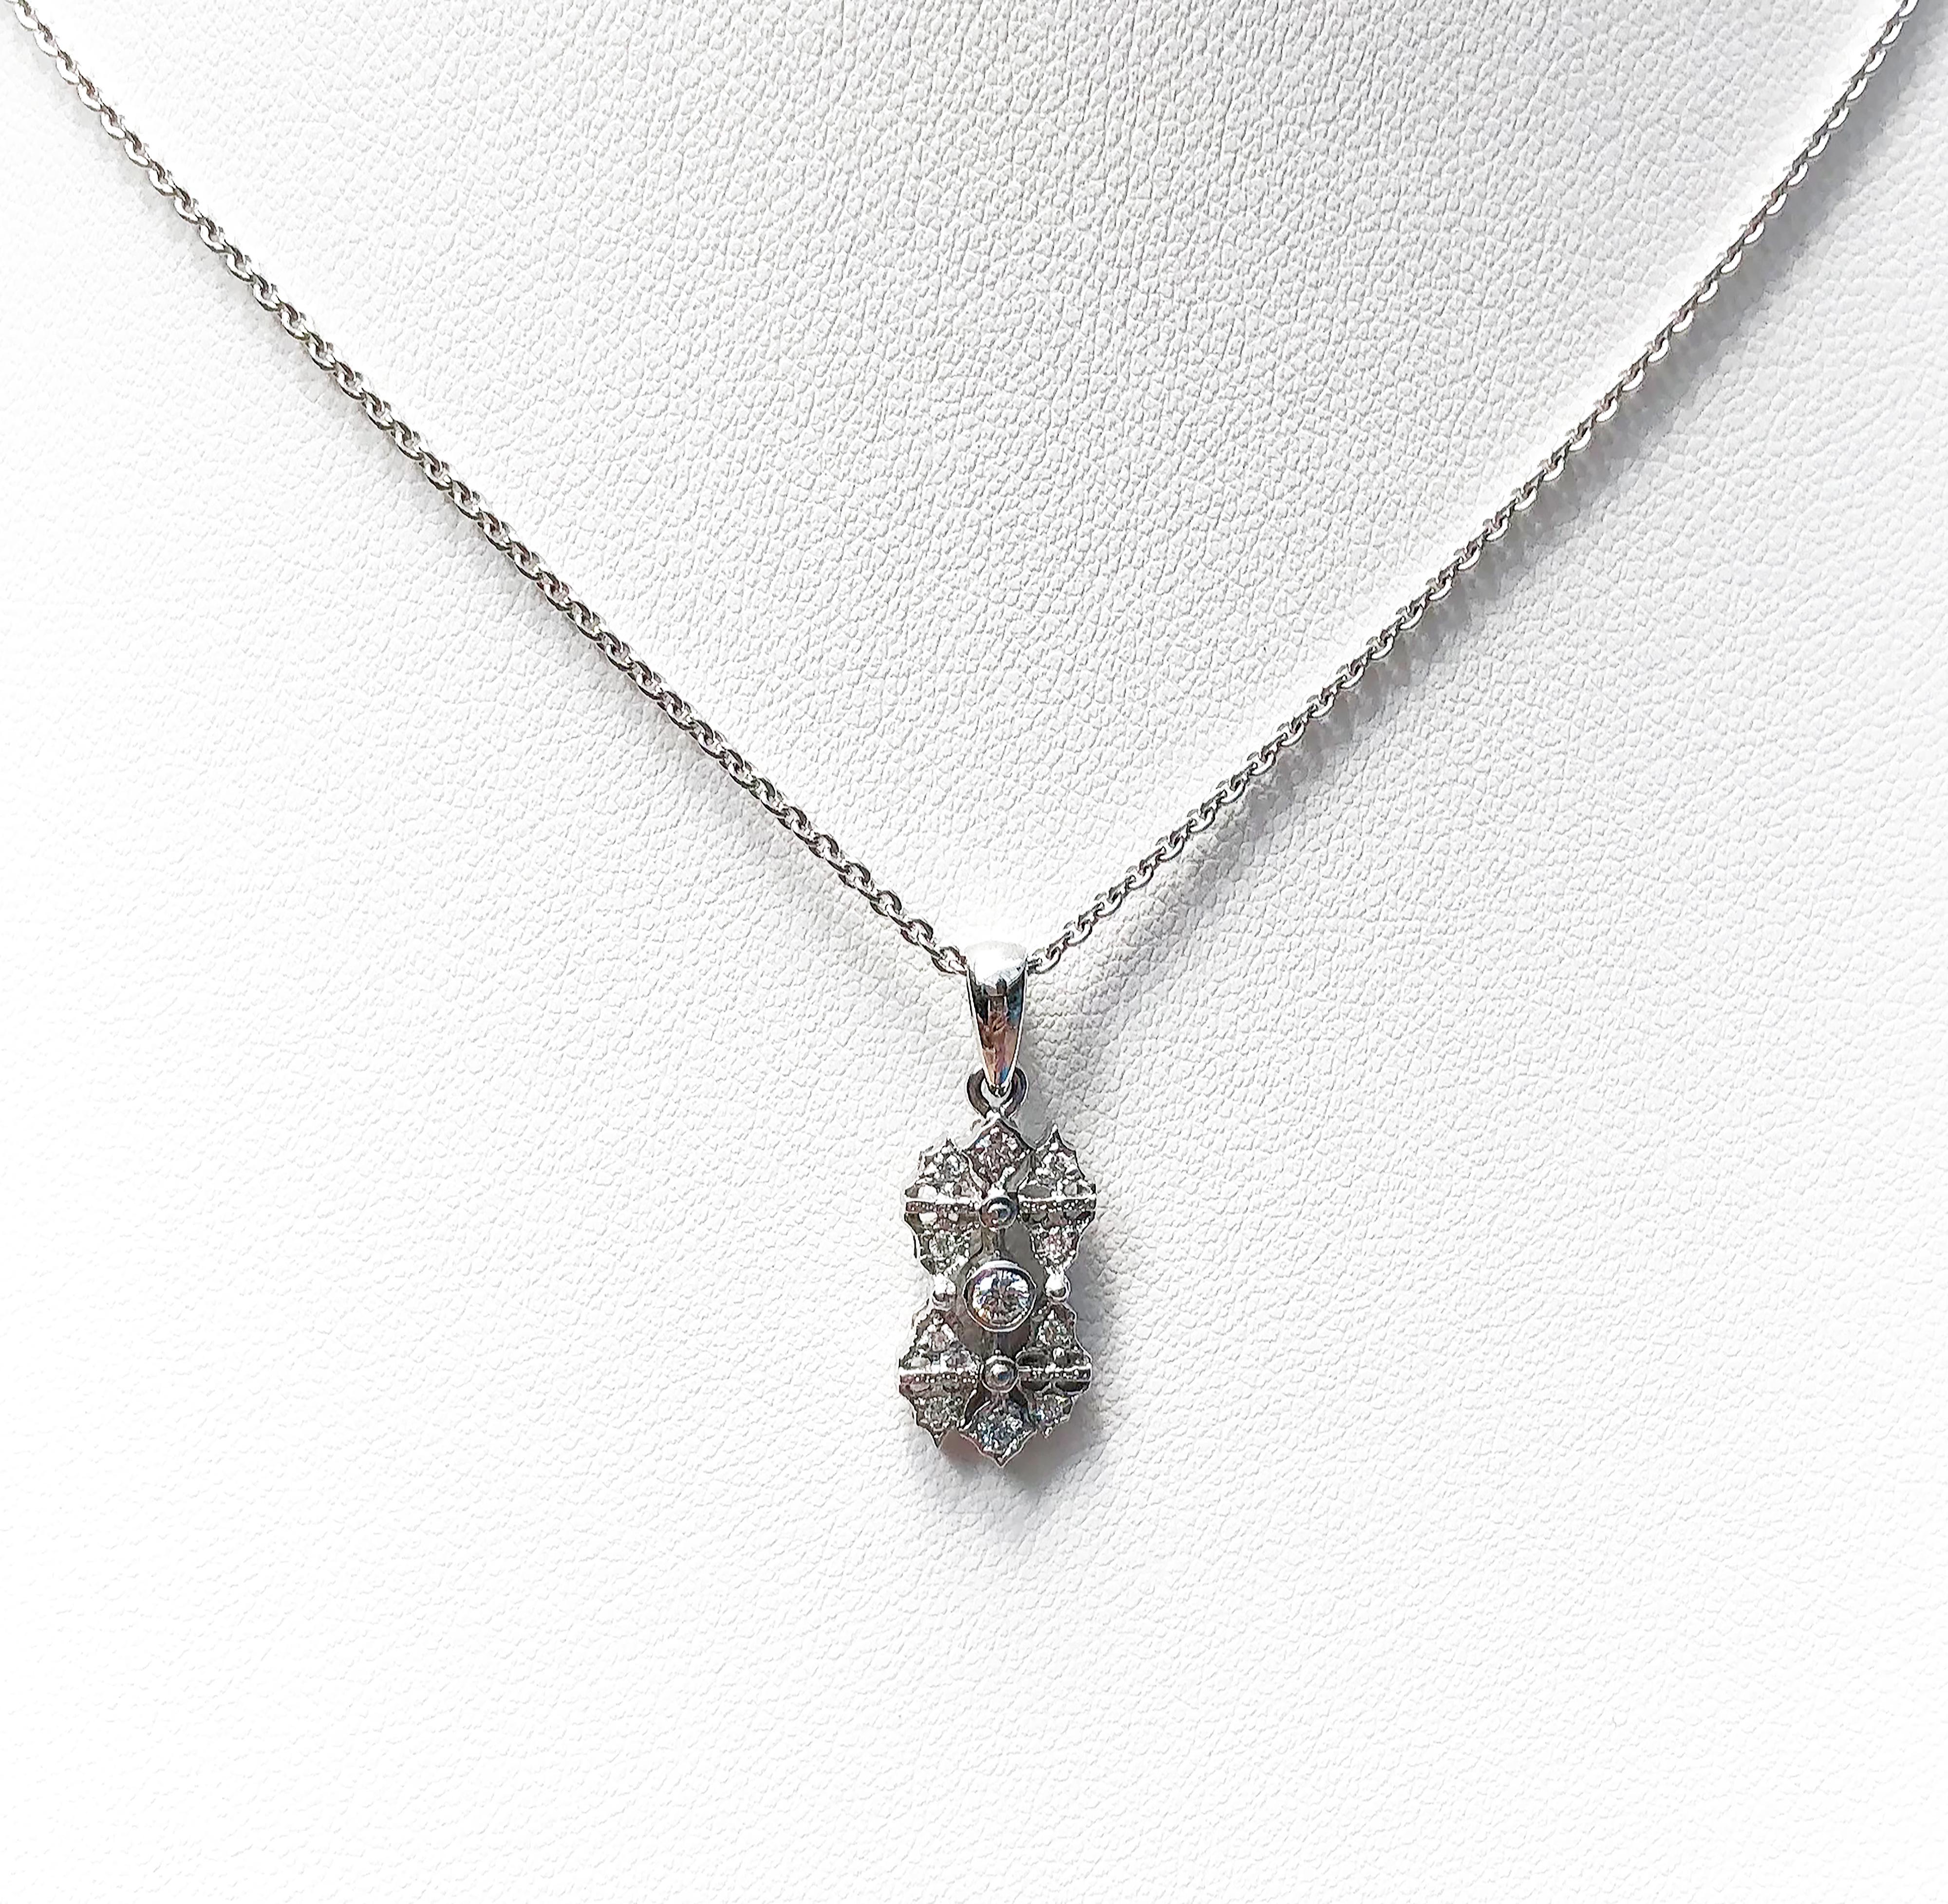 Diamond 0.18 carat Pendant set in 18 Karat White Gold Settings
(chain not included)

Width:  1.0 cm 
Length: 2.3 cm
Total Weight: 2.13 grams

